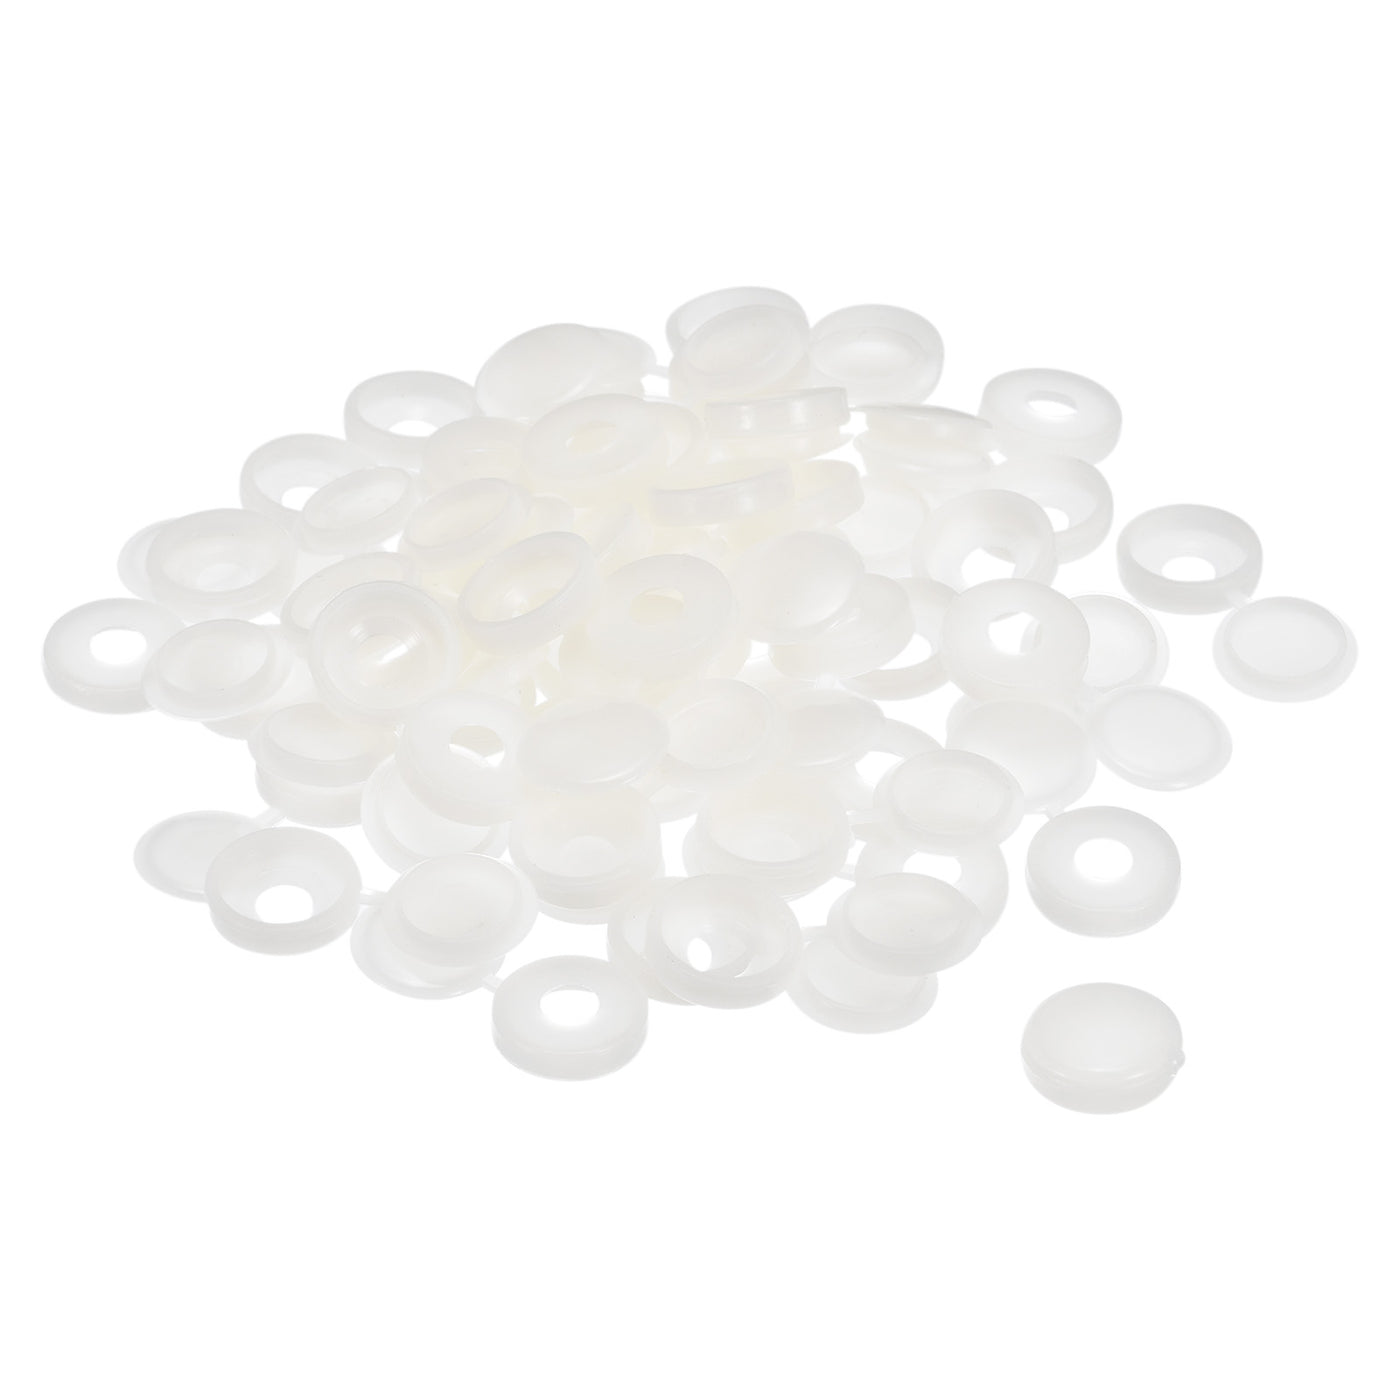 uxcell Uxcell 200Pcs 5mm Hinged Screw Cover Caps Plastic Fold Screw Snap Covers, Warm White